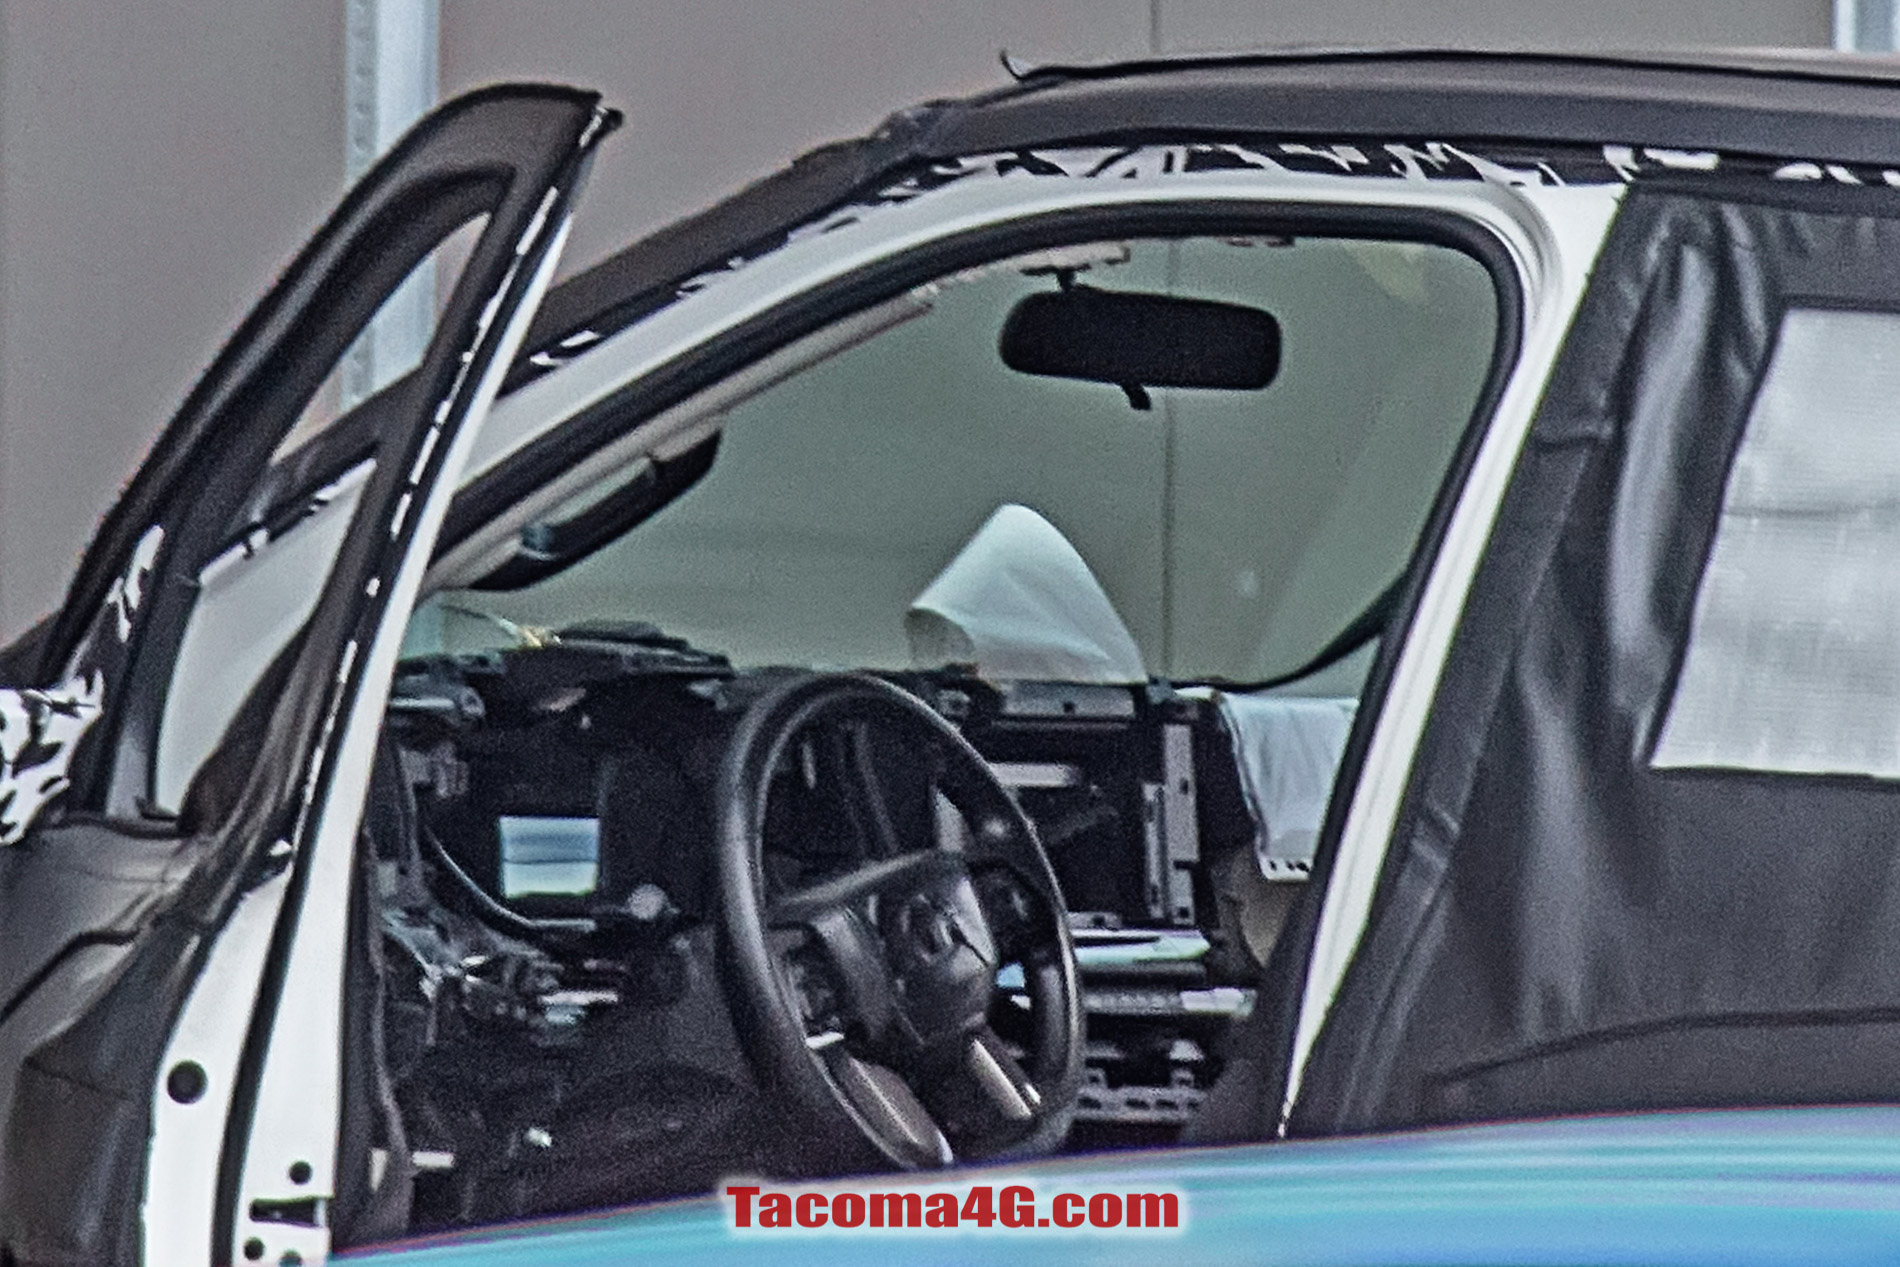 2024 Tacoma New 2024 Tacoma (4th Next Gen) Mule Off-Road Testing Reveals More Suspension Details -- 5/27/22 2024 Toyota Tacoma 4th gen spy photos suspension interior 24